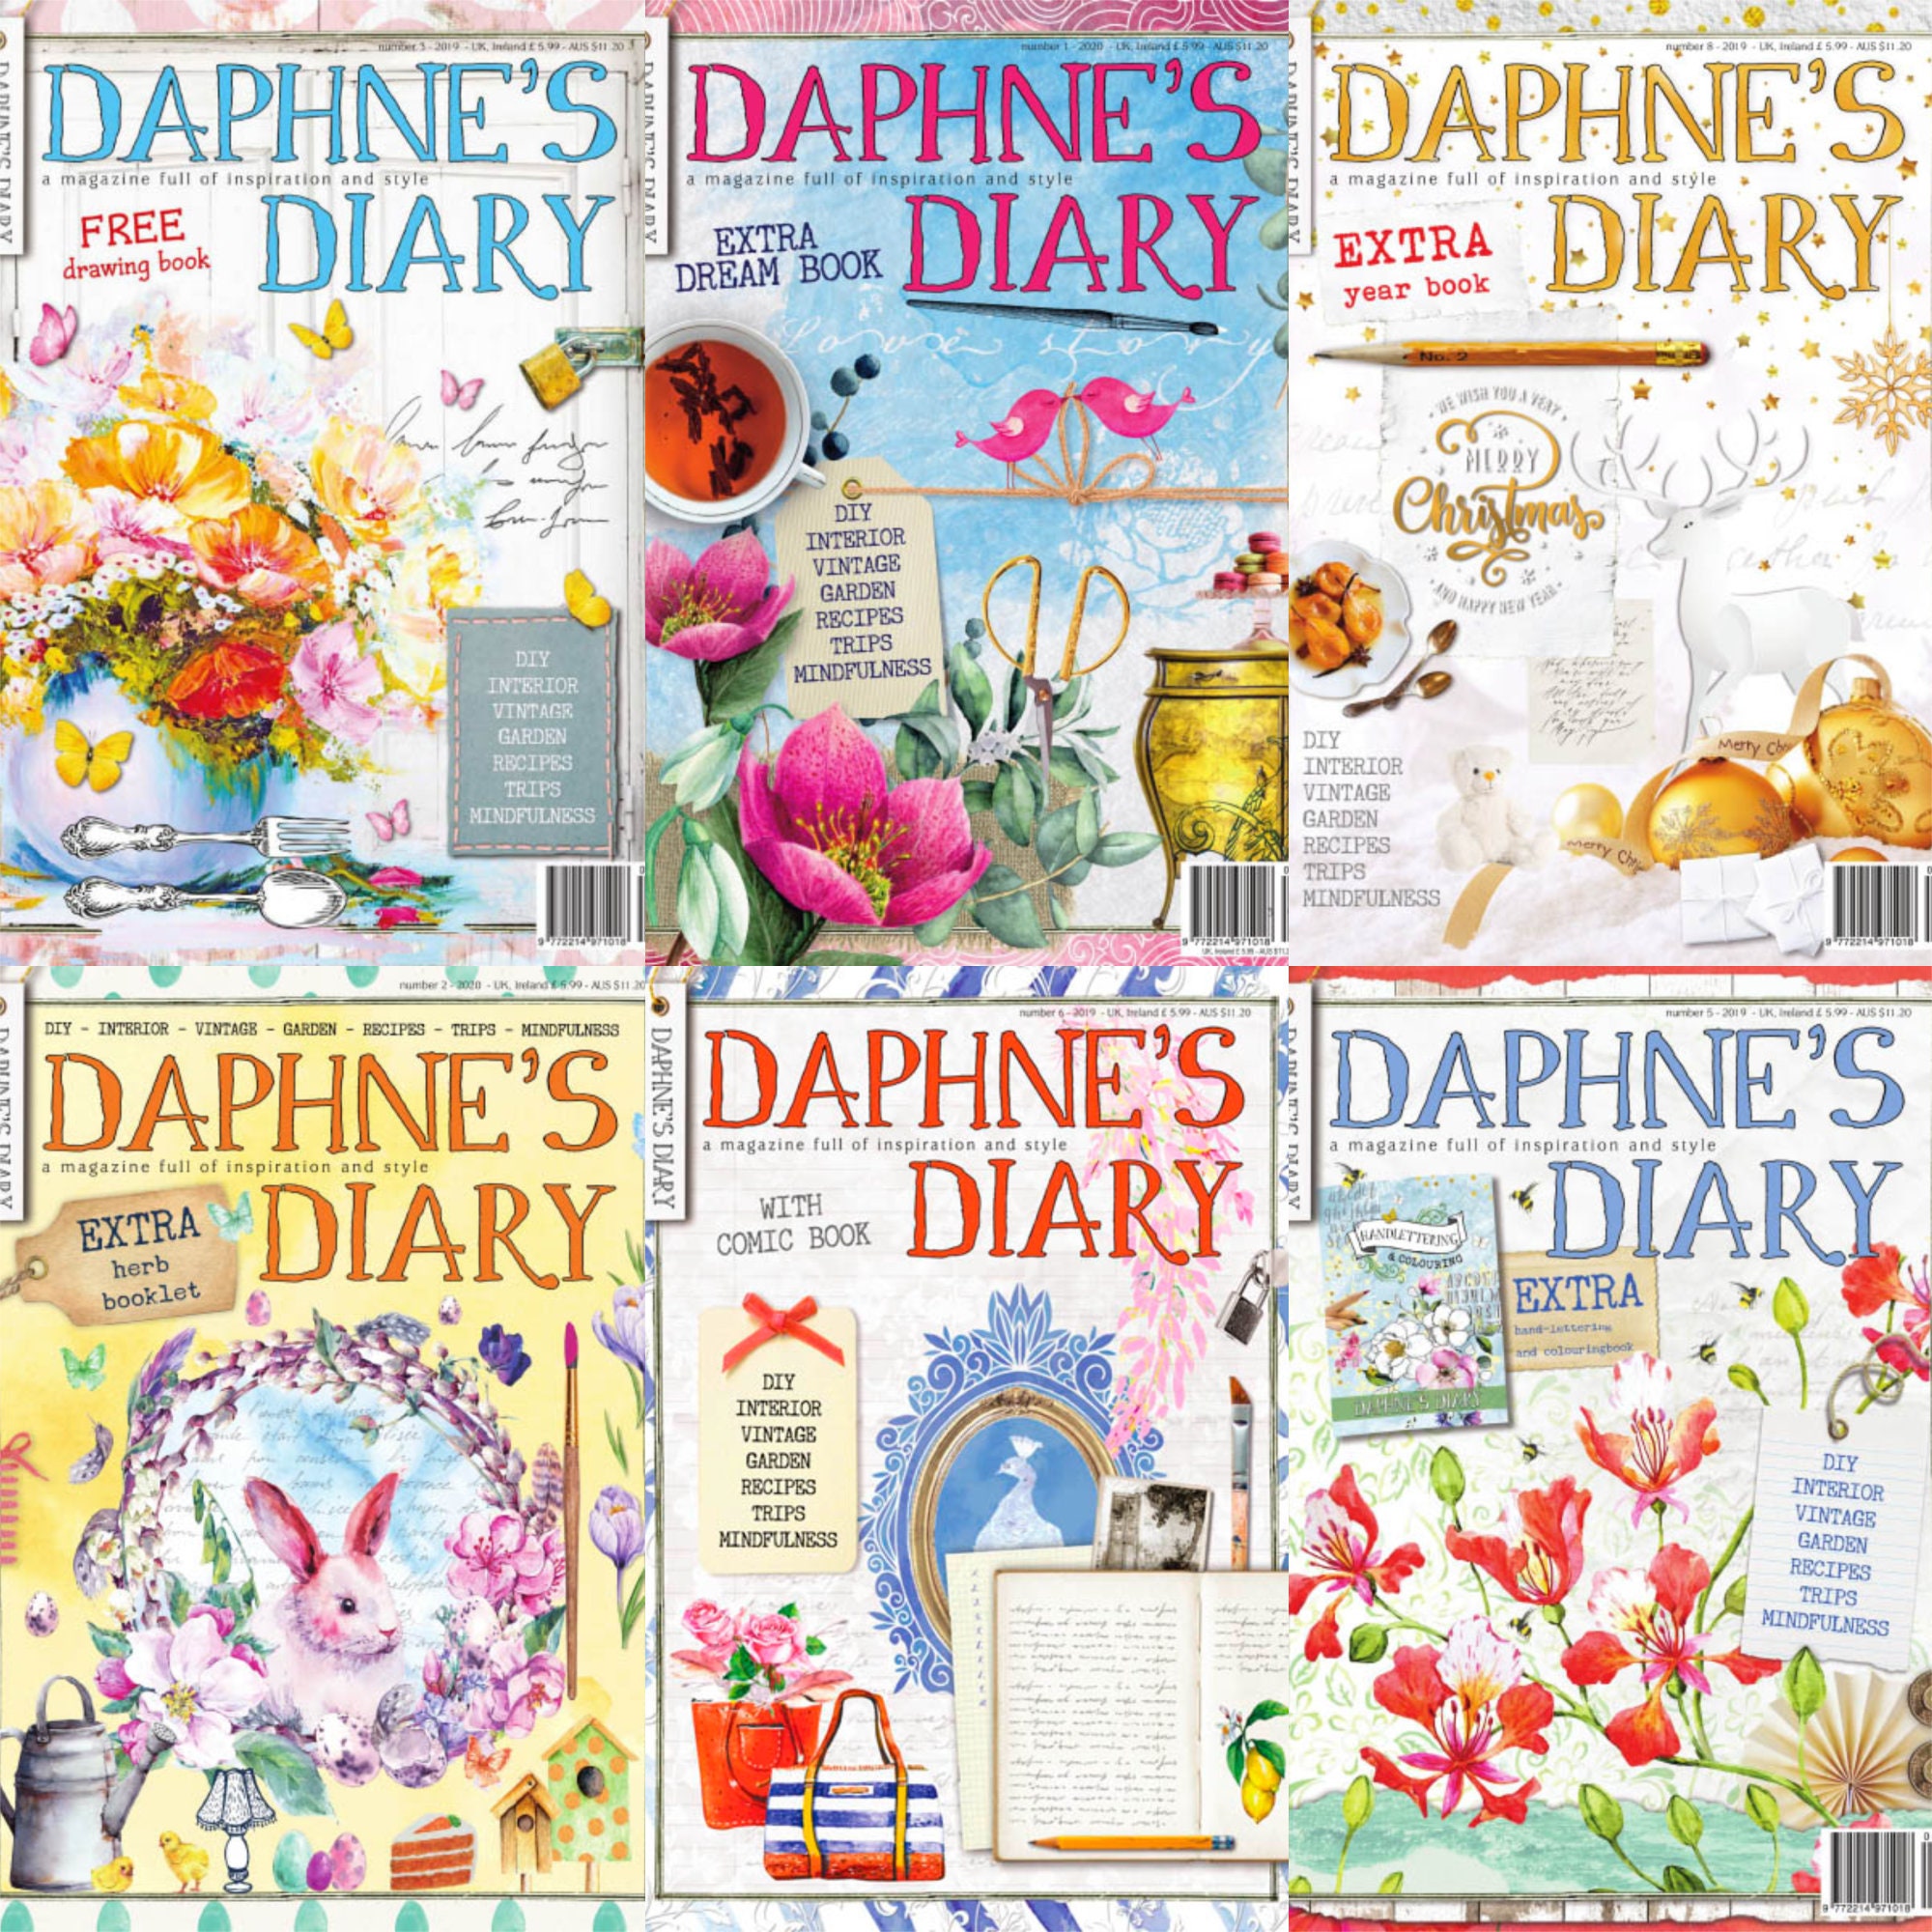 Daphne's Diary Magazine Issue 5 2022 - Ocean Poster Holiday